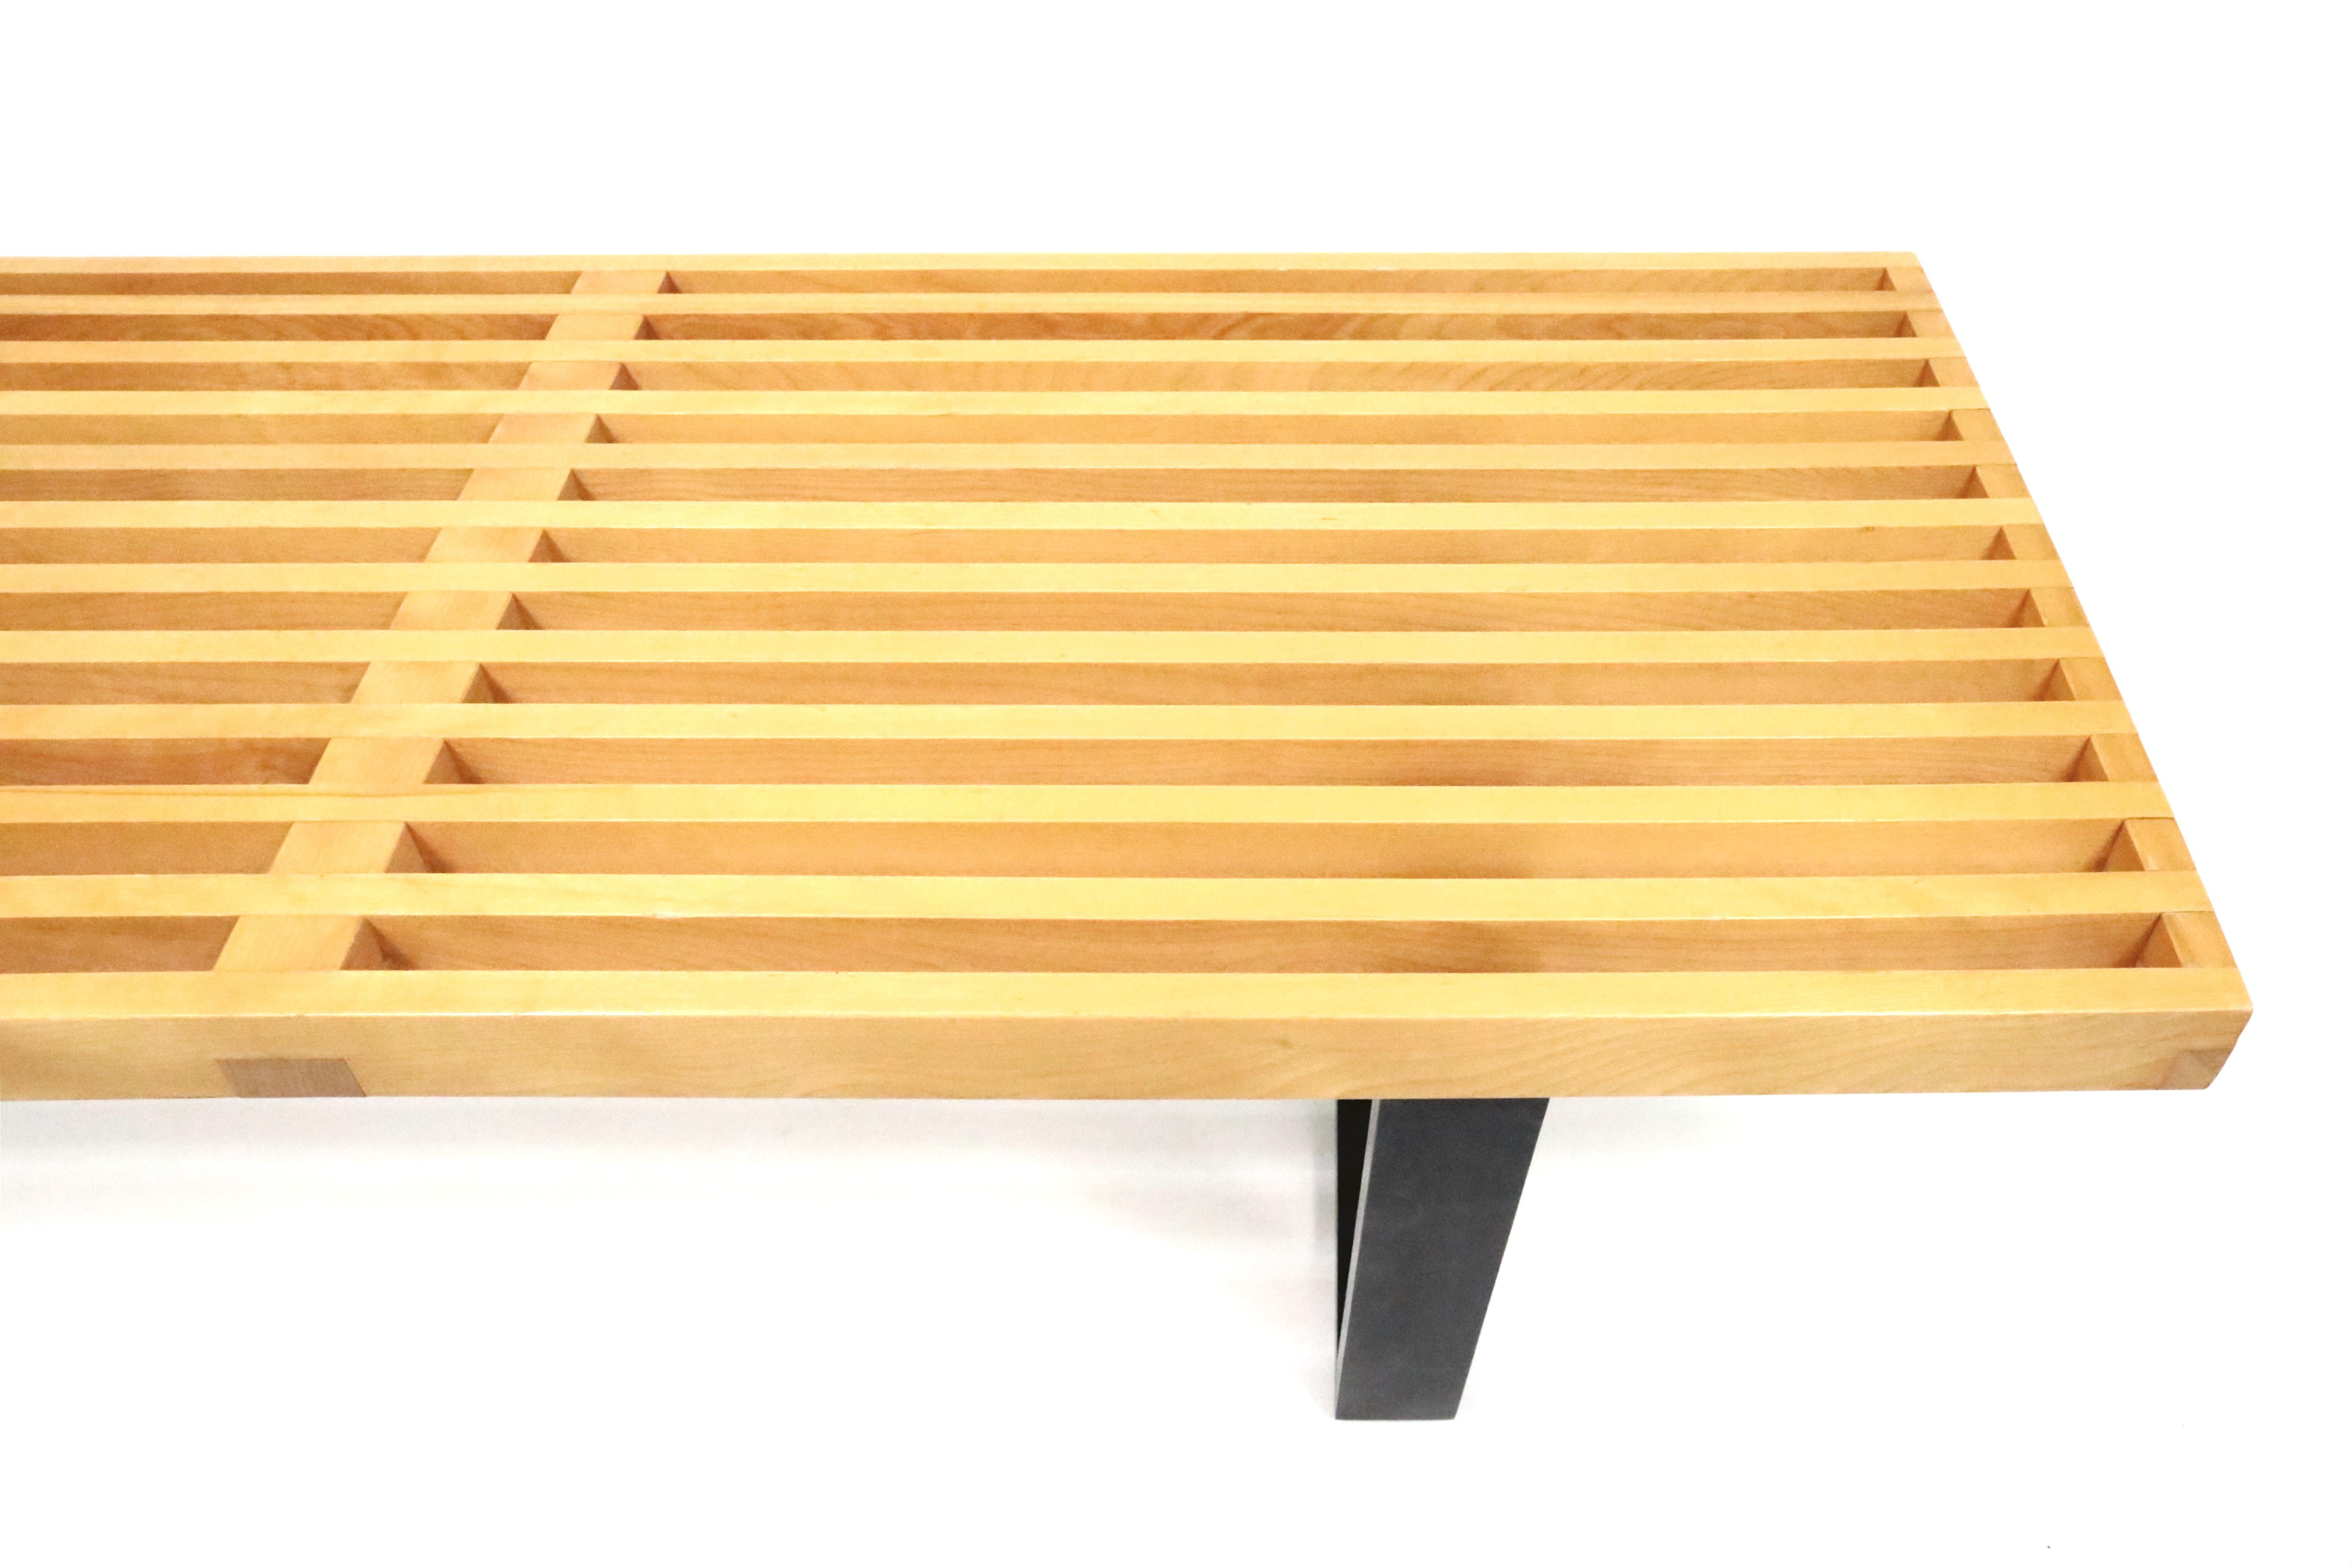 Maple Early George Nelson Platform Bench for Herman Miller